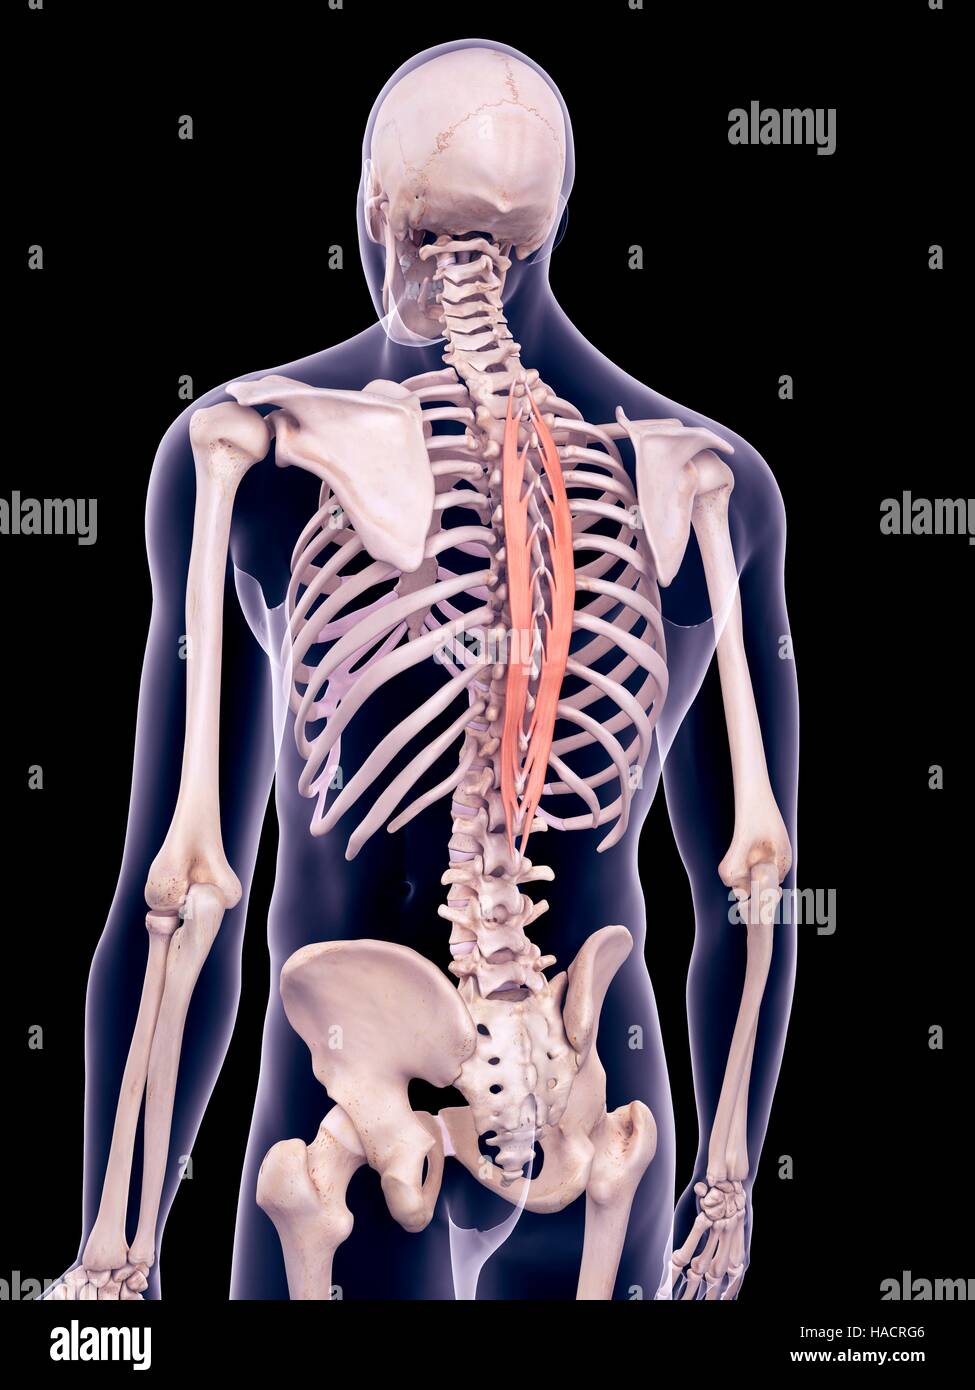 Illustration of the spinalis thoracic muscles. Stock Photo